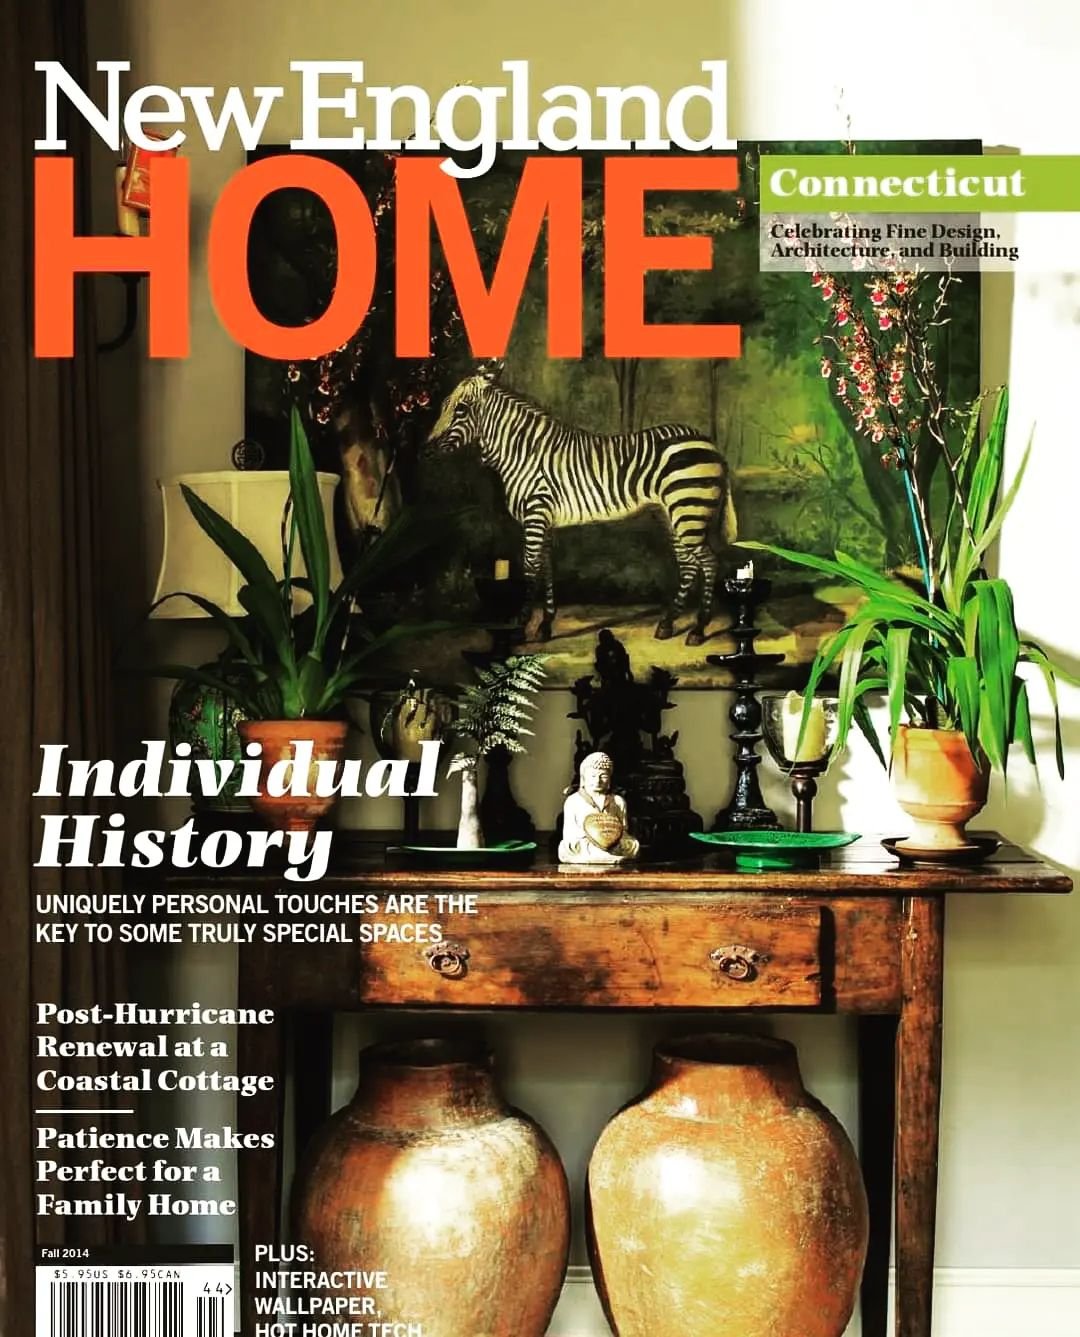 We got the cover.  Publicly over the years for J. SEITZ.  This one shot 8 years ago at the Seitz home in NW Connecticut.  We were told by the editors that this was the most popular cover that year!  @nehomemagazine #covershot #individual #history #ze